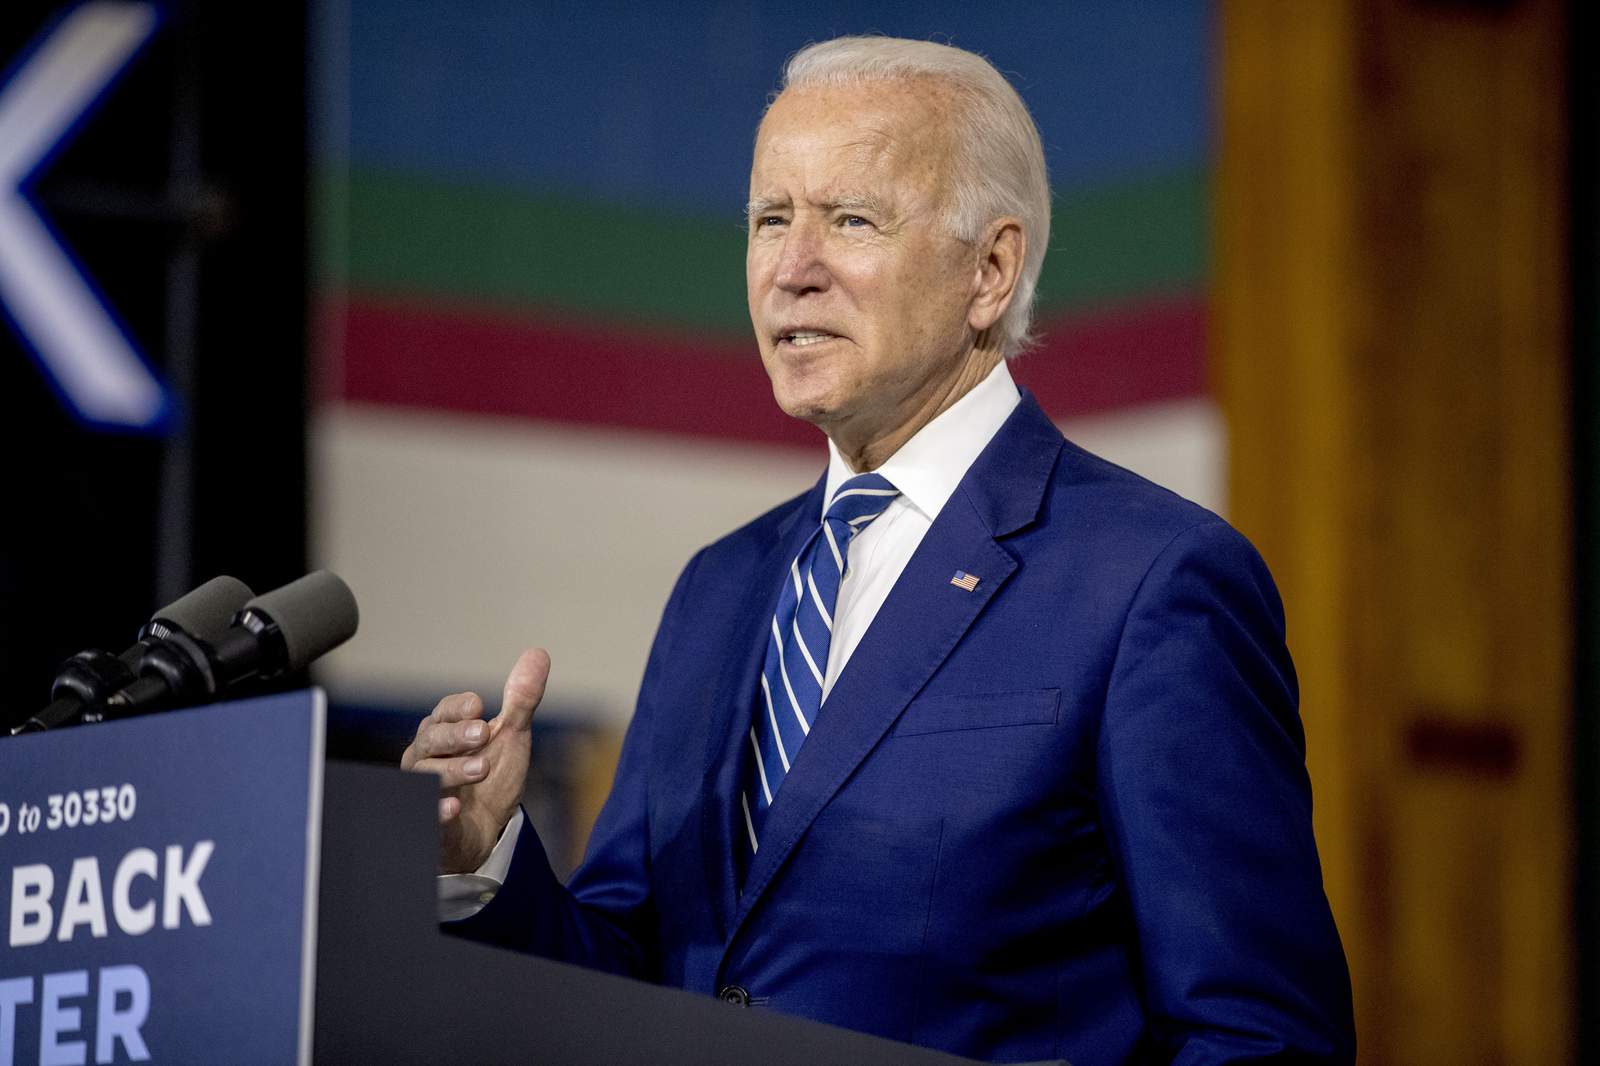 Biden says post-pandemic economy can fight racial inequality